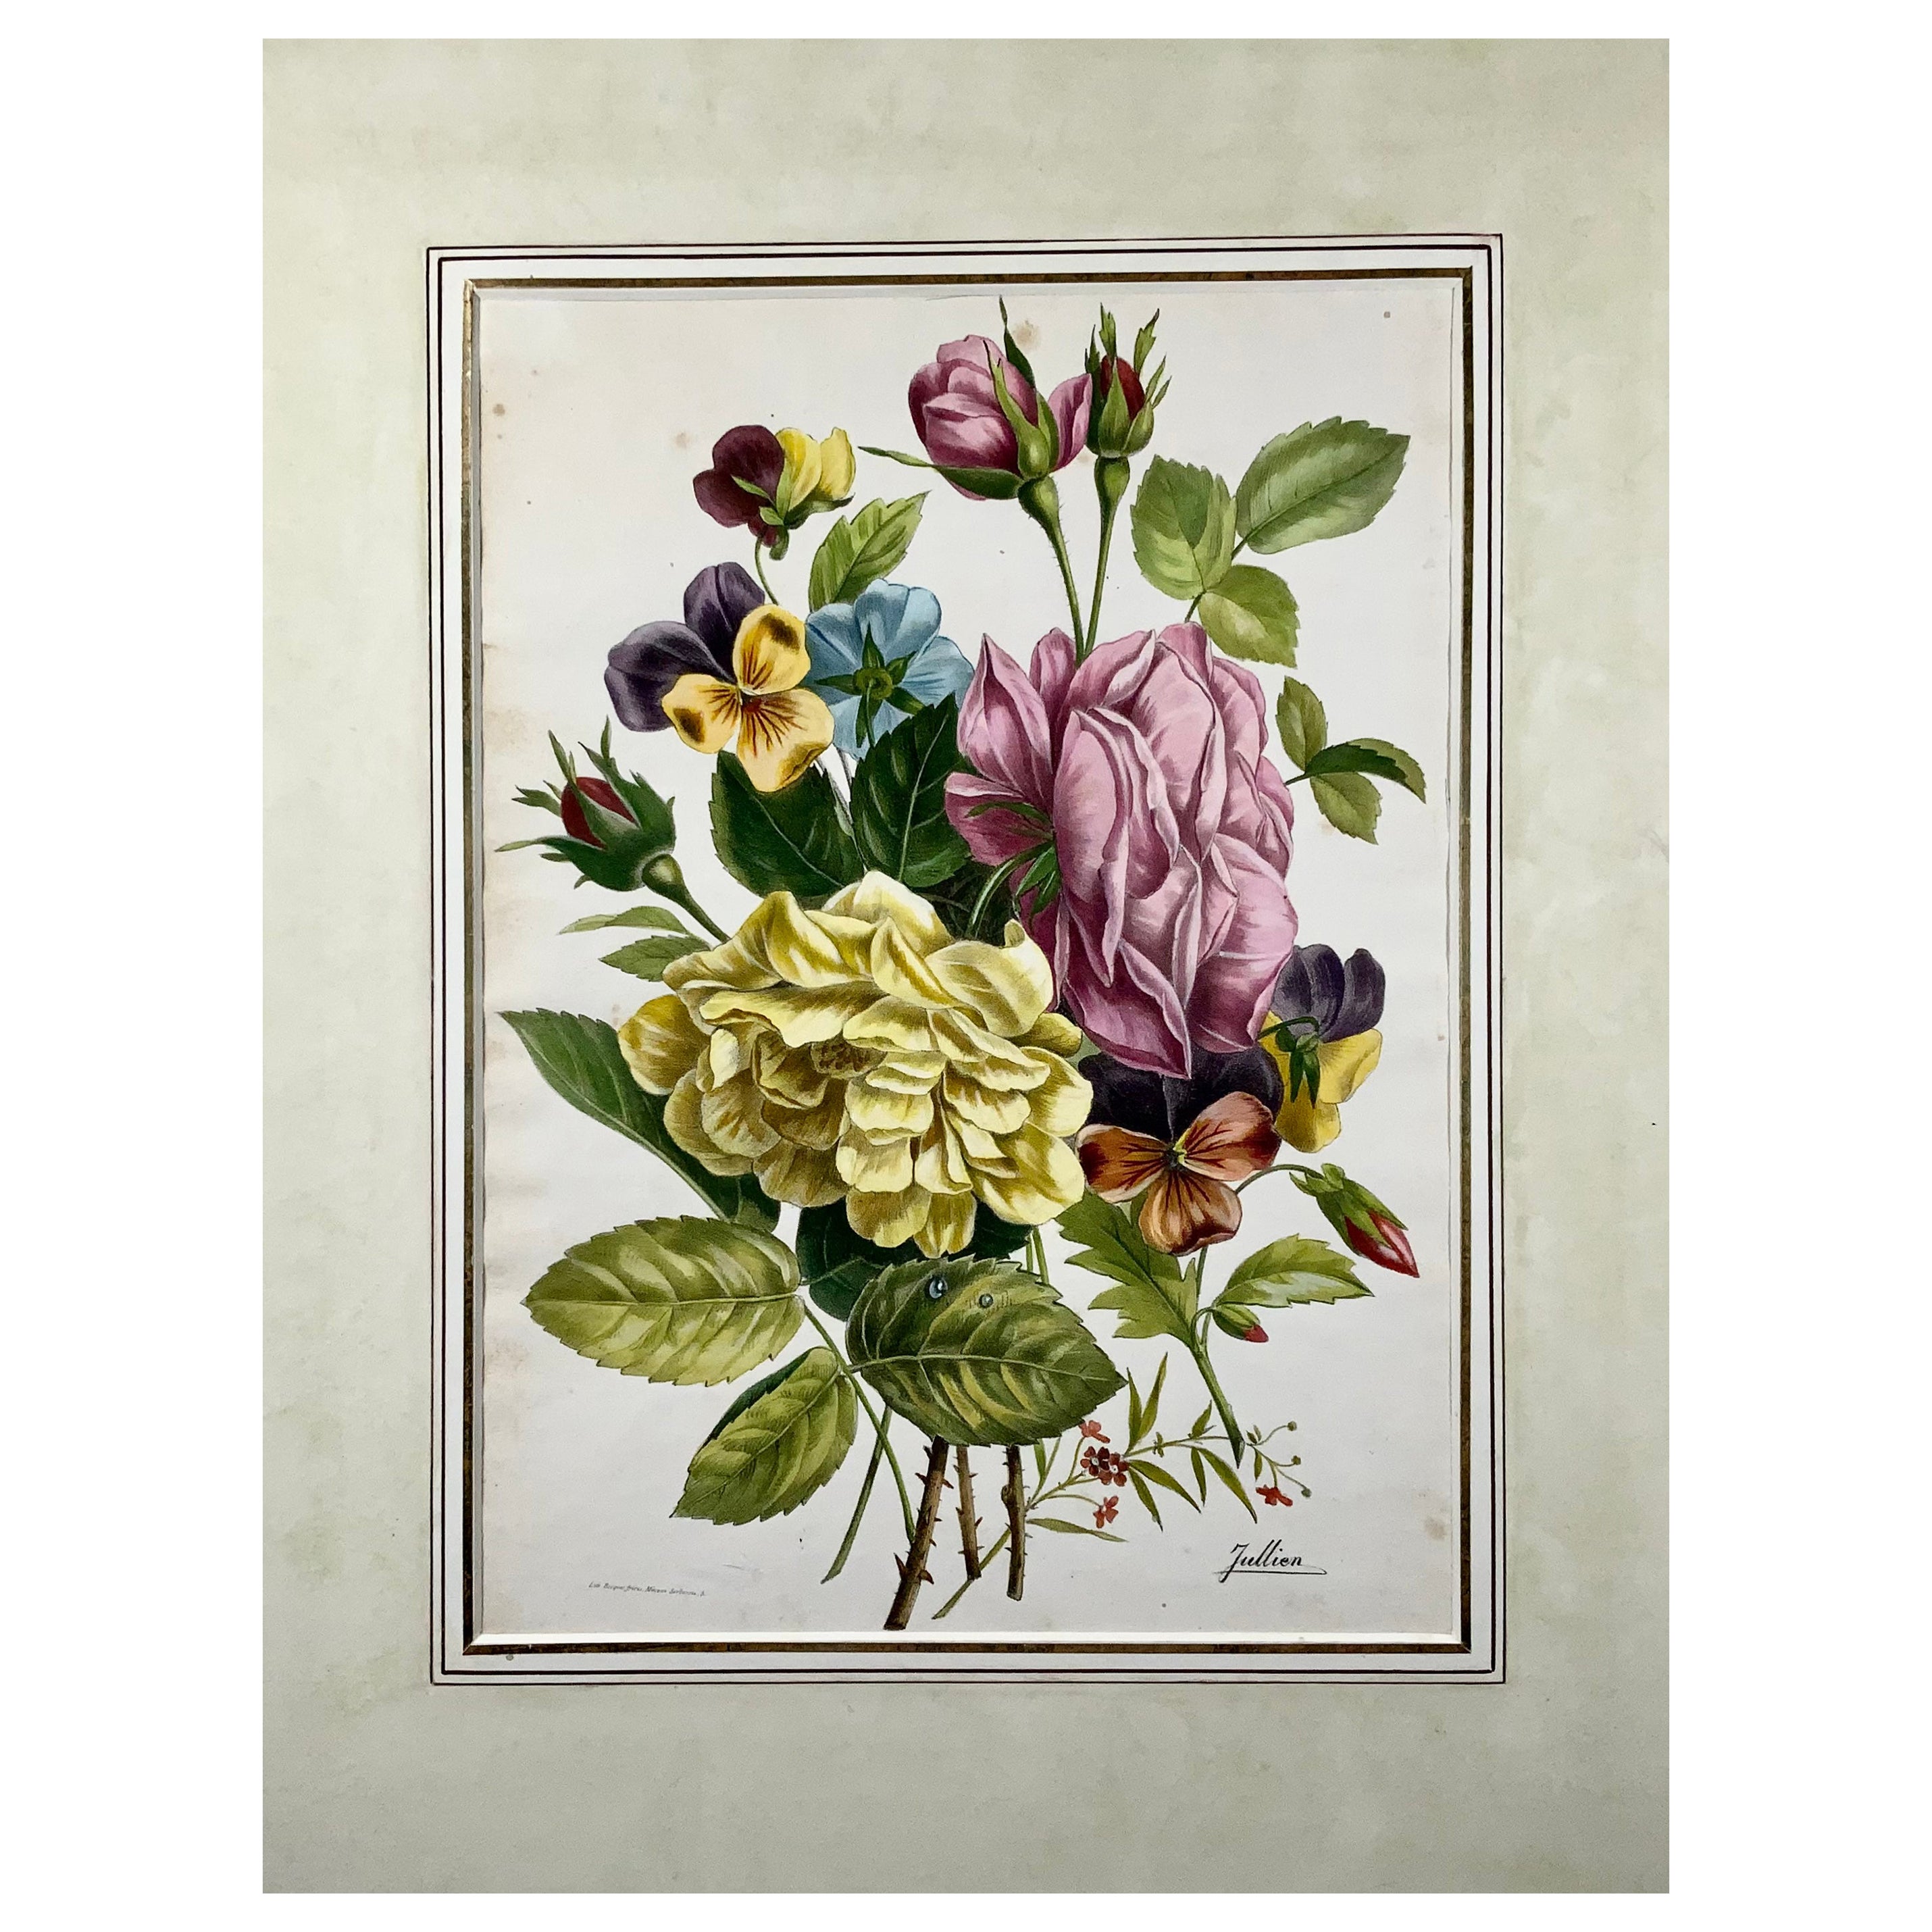 Roses & Pansies, Jullien, Bequet, large stone lithograph hand coloured For Sale